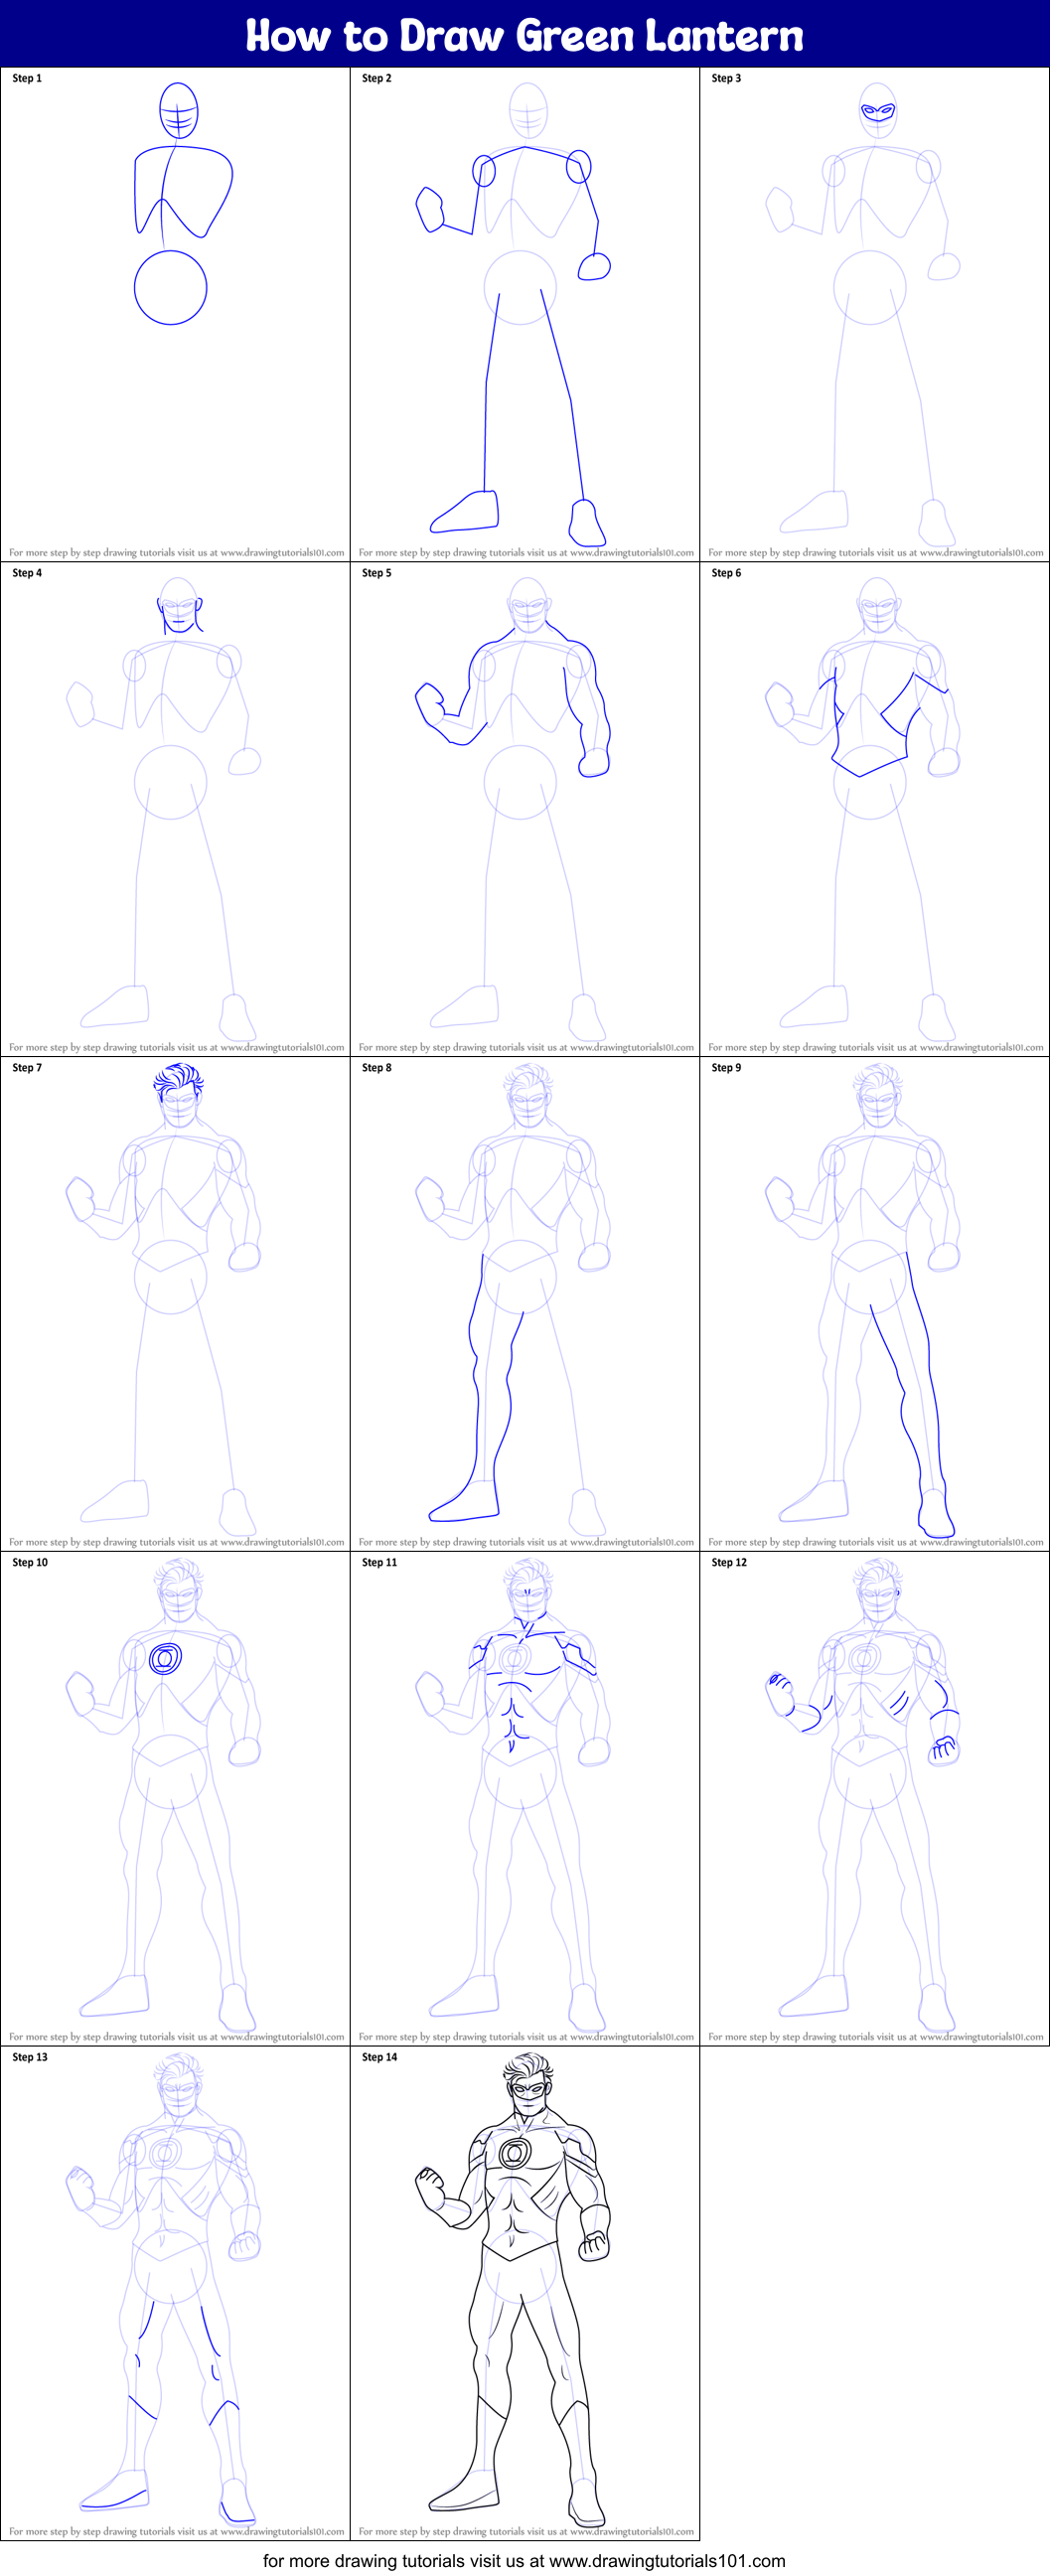 How to Draw Green Lantern printable step by step drawing